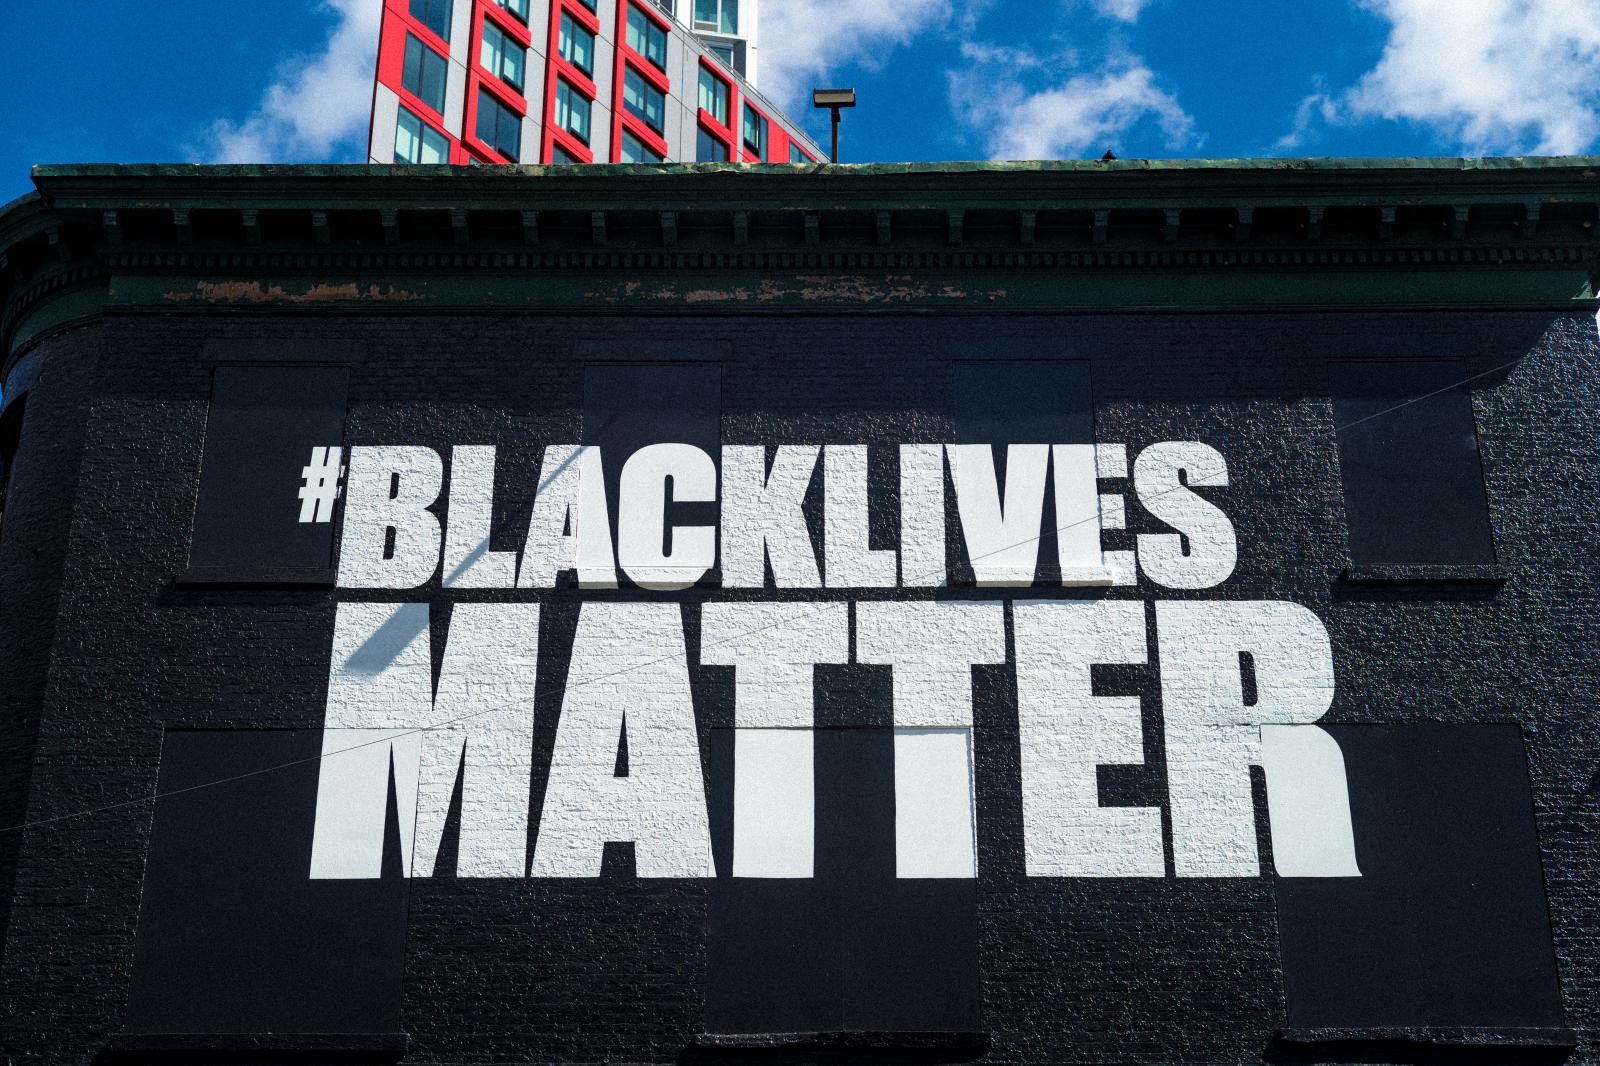 Image from Black Lives Matter -  August 30, 2020  5th Avenue/Park Slope, Brooklyn NYC 